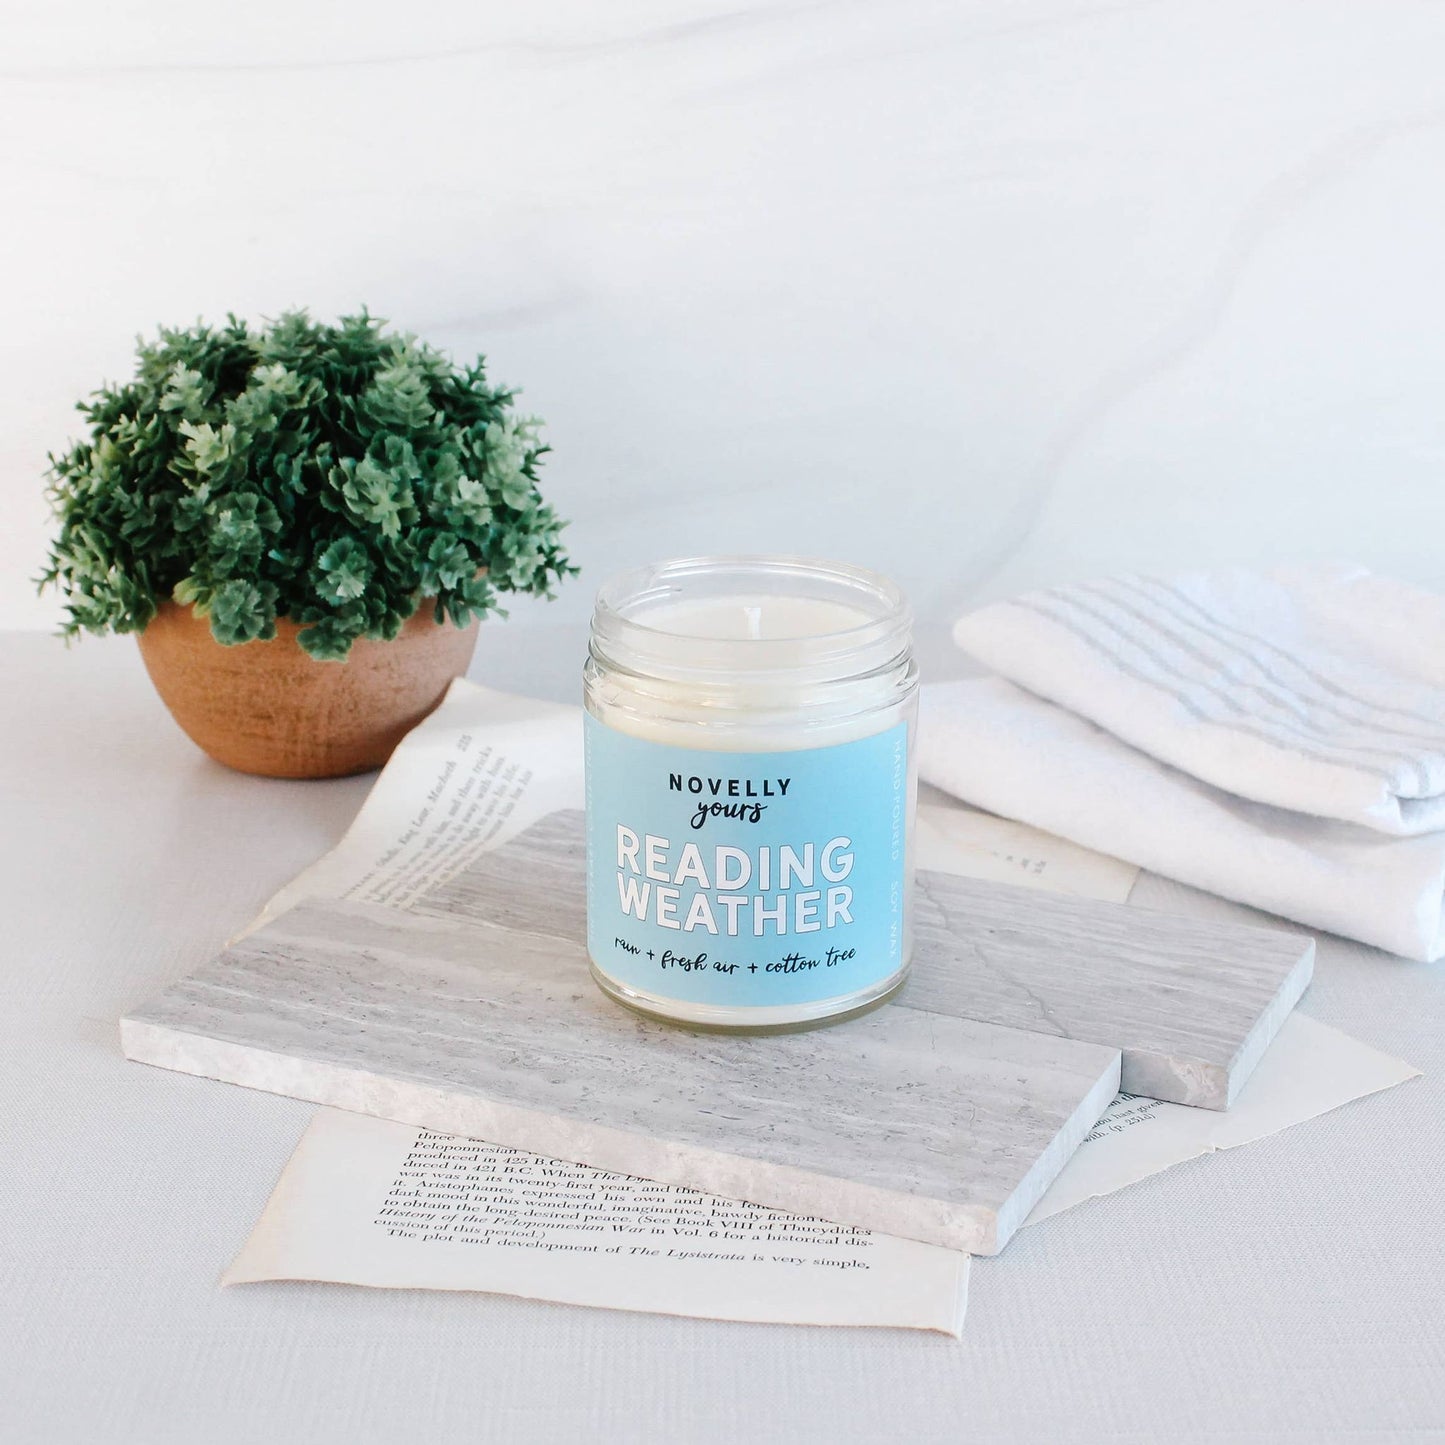 Reading Weather Candle by Novelly Yours Candles